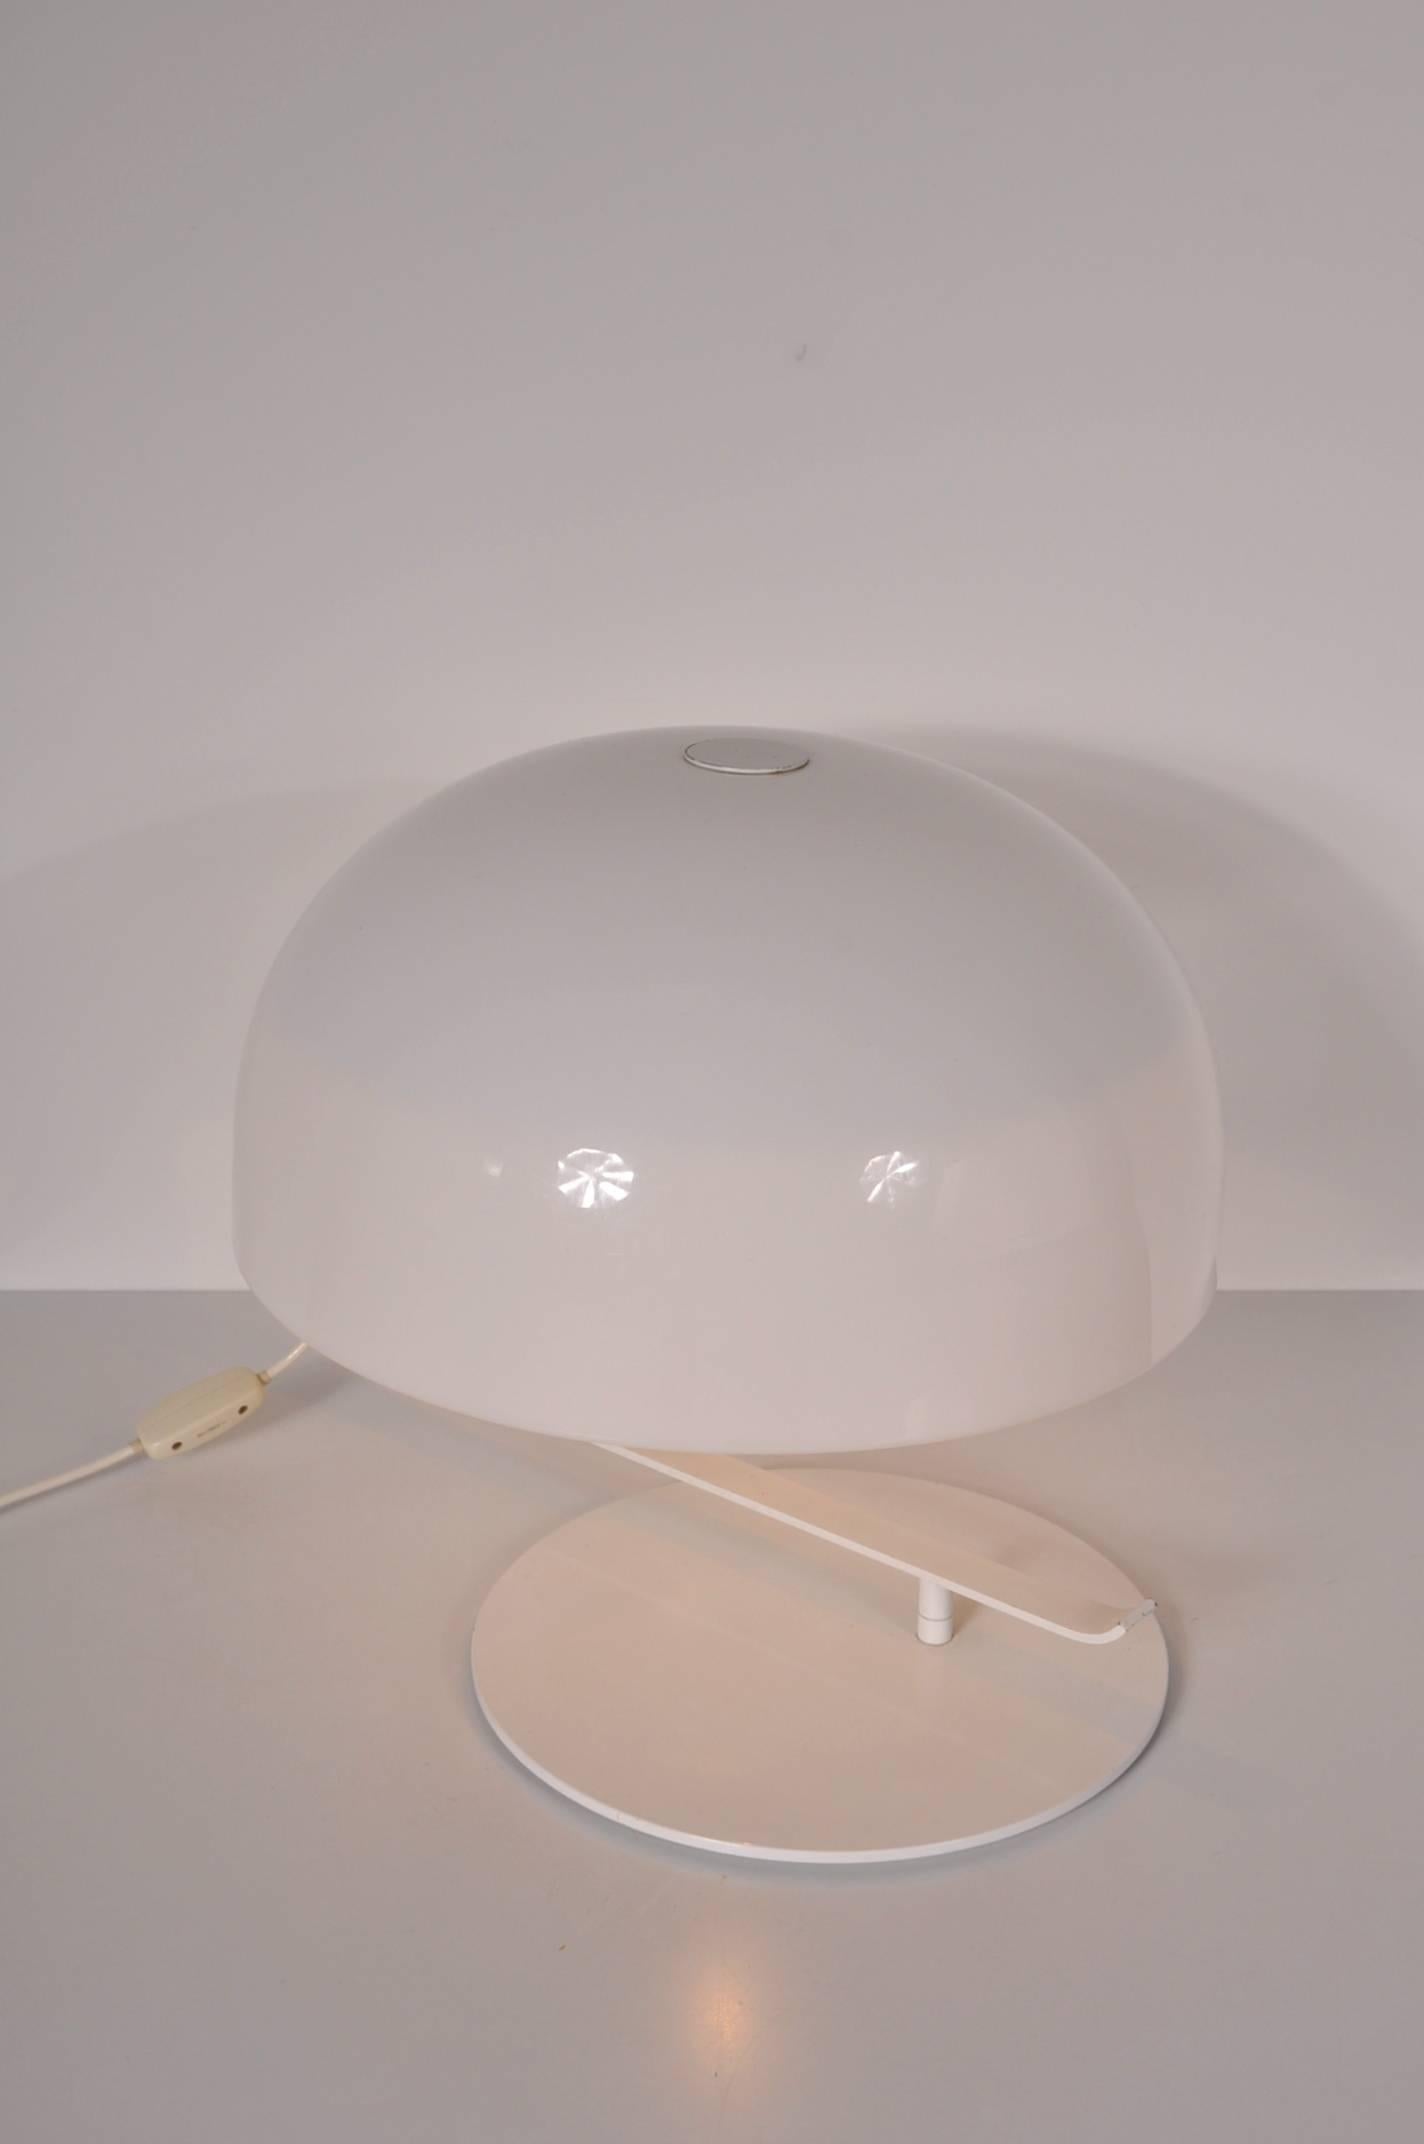 Eye-catching table lamp designed by Marco Zanuso, manufactured by O-Luce in Italy around 1960.

This beautiful piece is made of high quality white plexiglass on a white metal base. The highly recognizable shape of the lamp would make this an